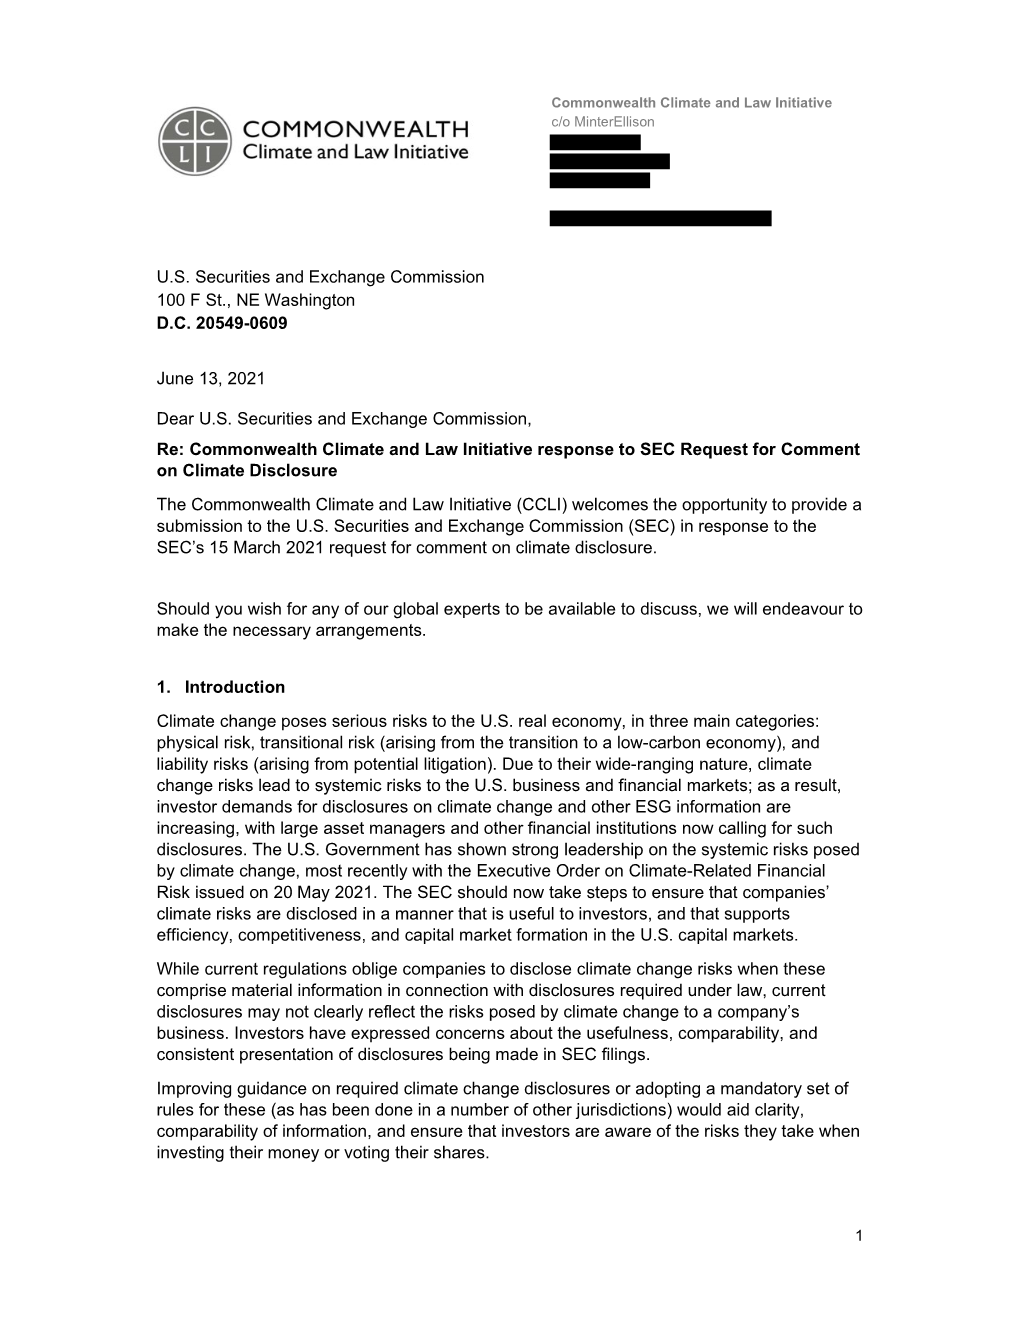 Re: Commonwealth Climate and Law Initiative Response to SEC Request